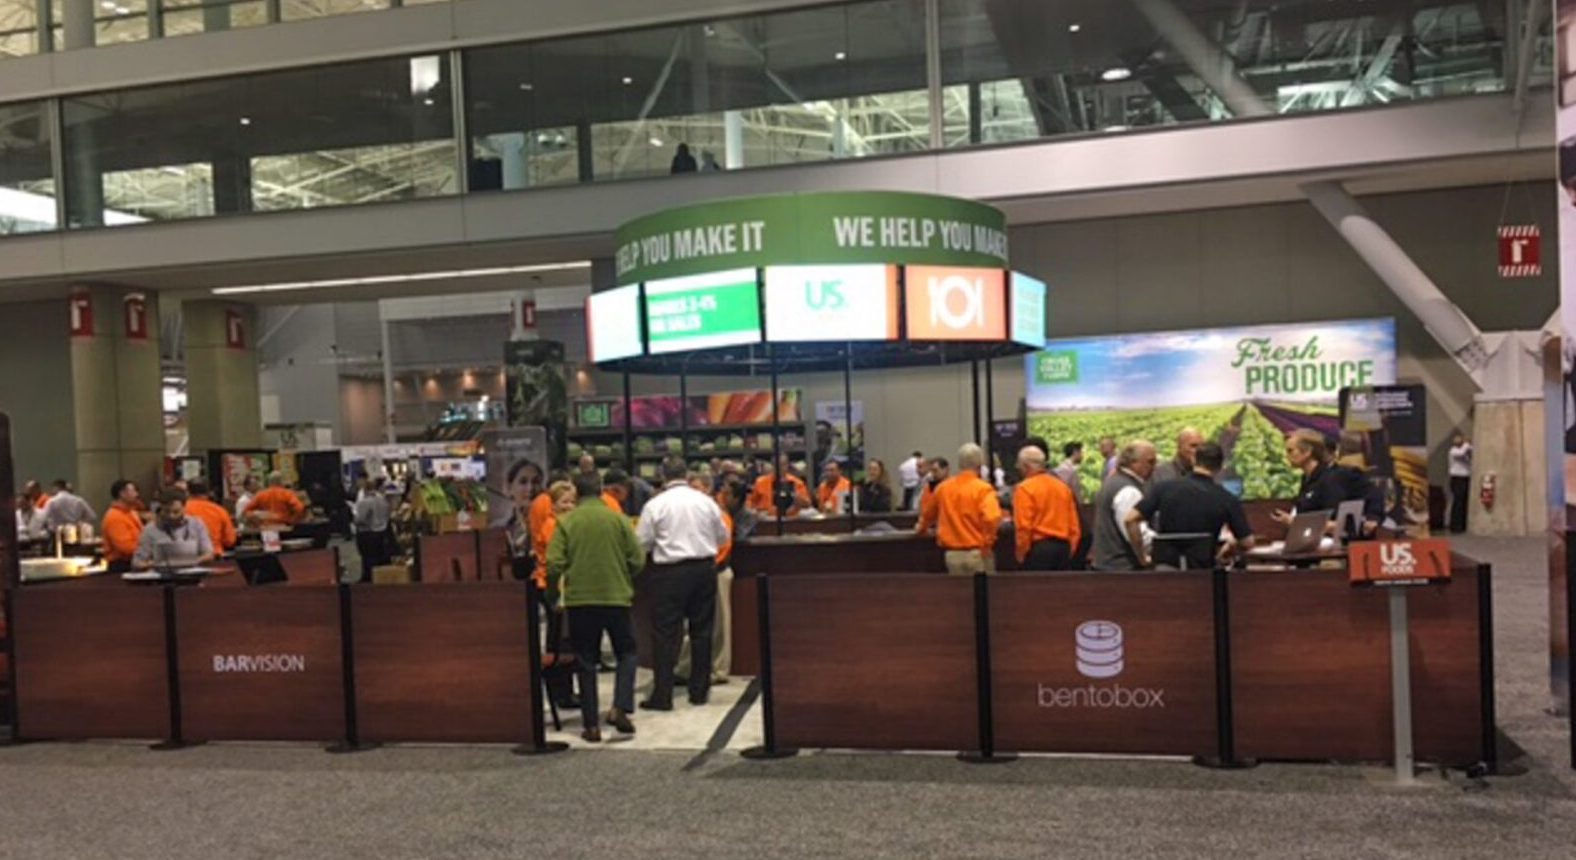 SEG US Foods Round Multiple TV Mount with tubular signage and crowd control double-sided graphics to enclose trade show booth